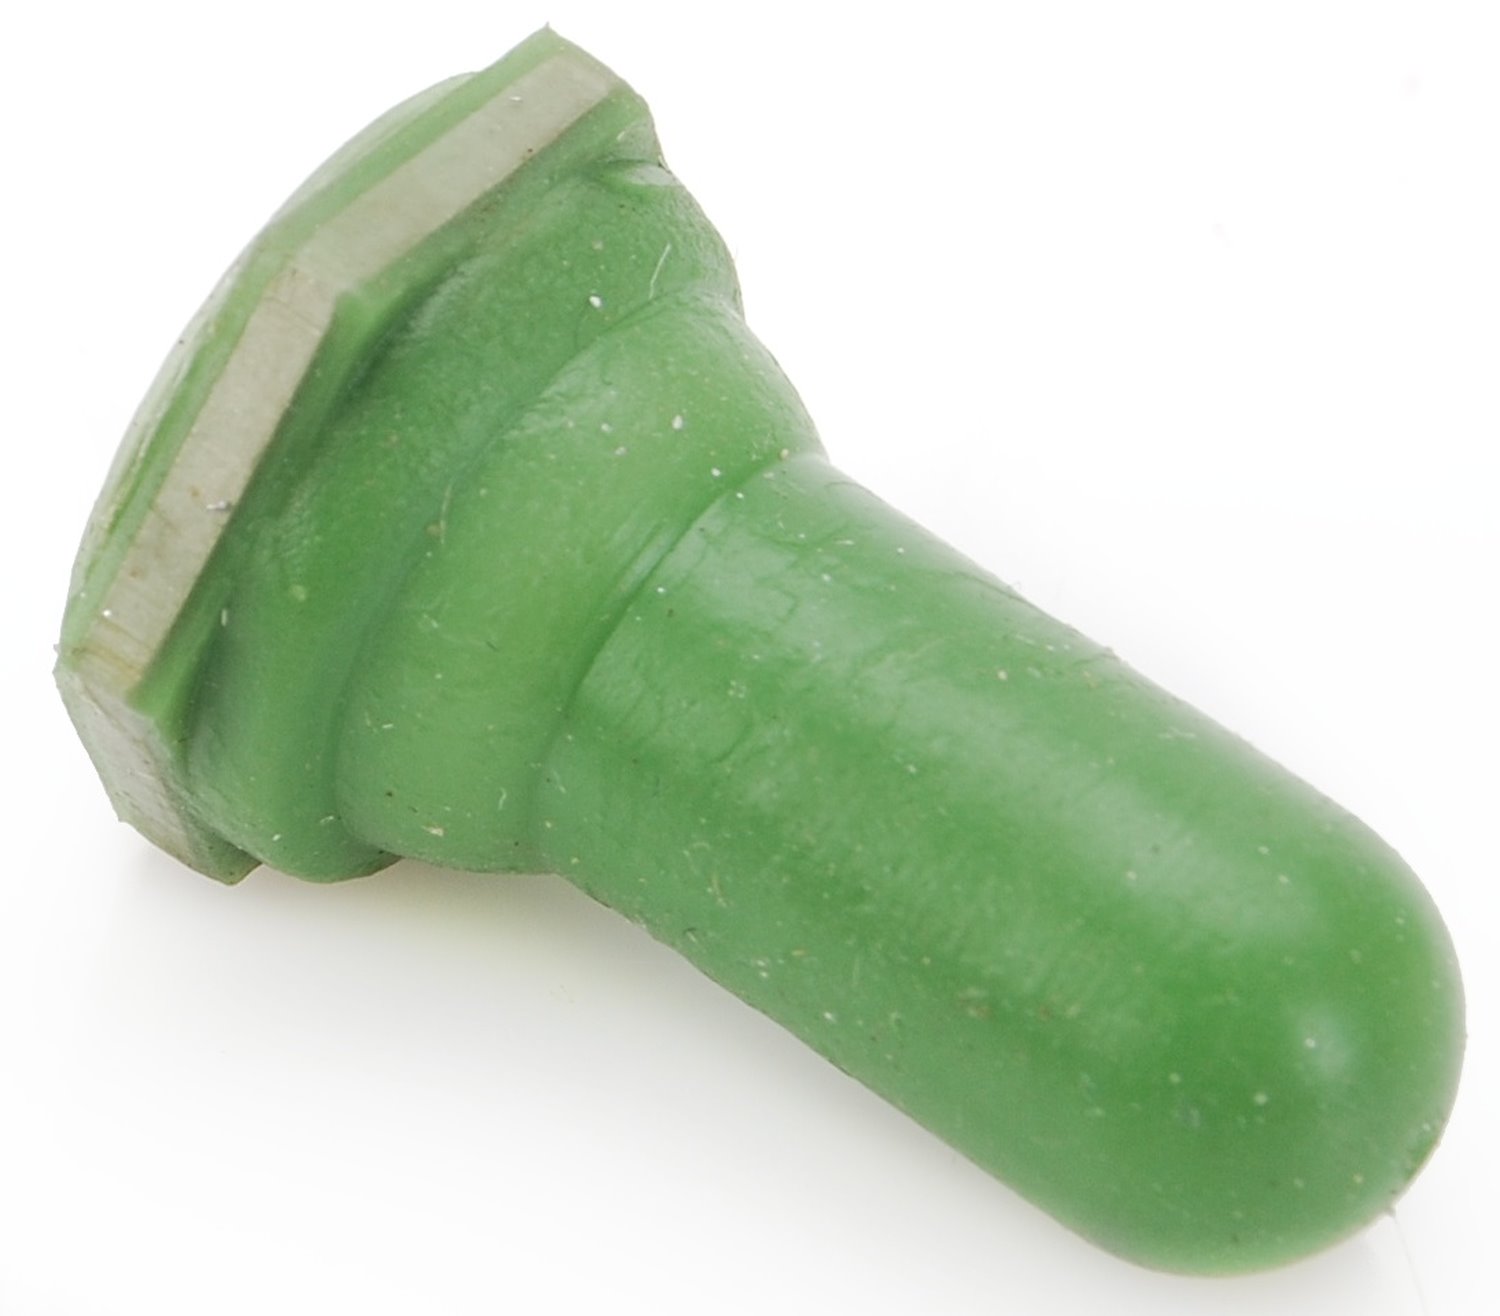 Toggle Switch Cover Green Fits: